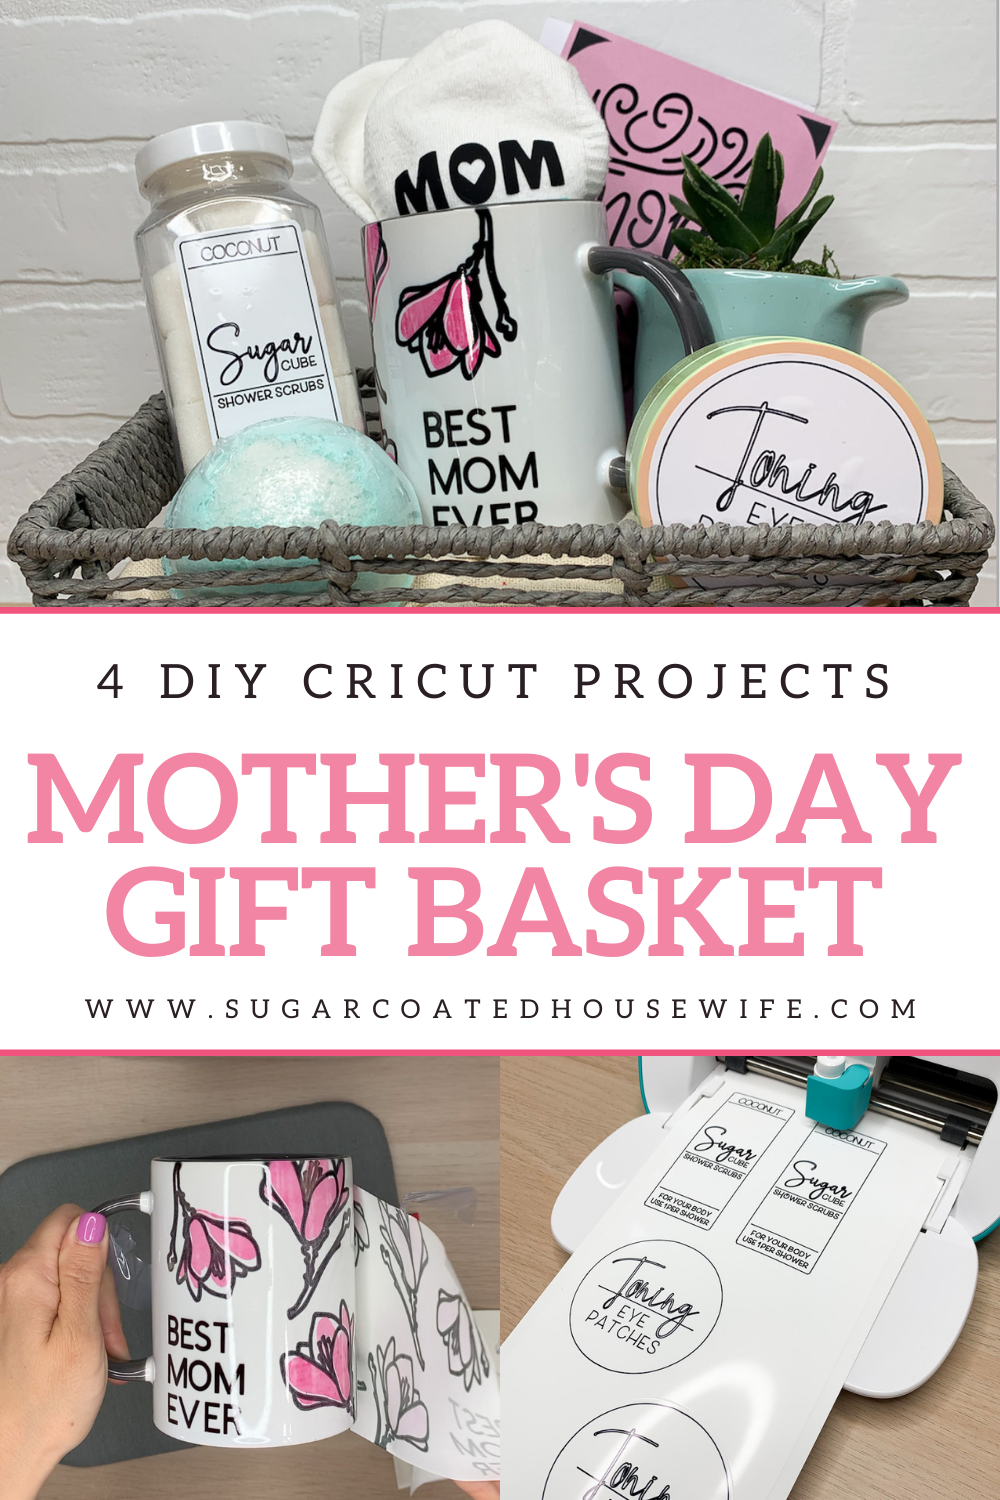 Mother's Day gift basket idea with a Cricut made mug, socks, card, and stickers pinnable image.